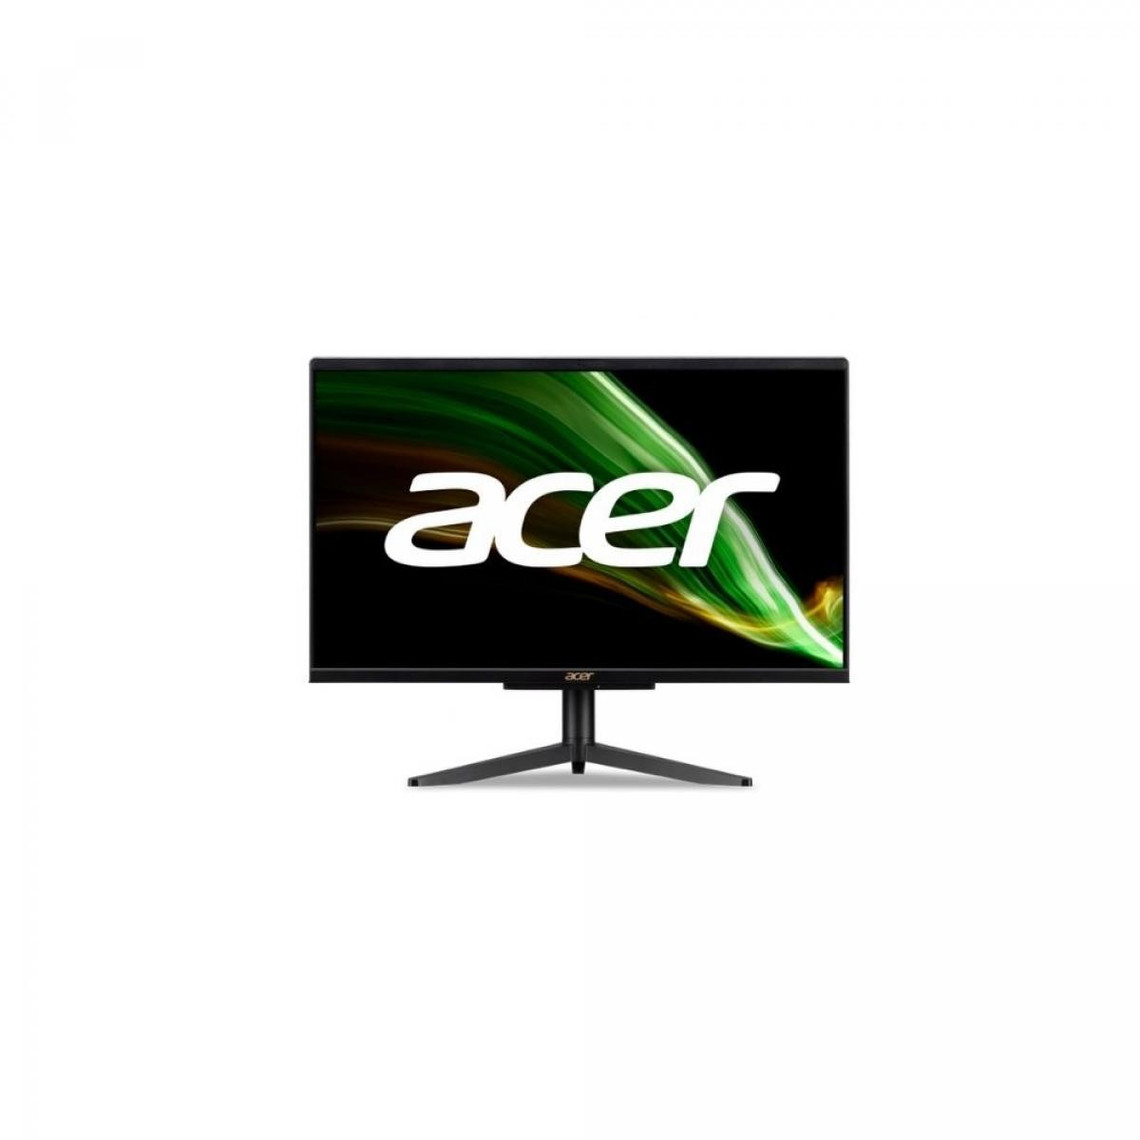 Acer All in One Acer Aspire C24-1600-002 Noir/or Intel® Pentium® Silver N6005 8Go 1 To 5400 Tpm Intel UHD Graphics Dalle 23.8